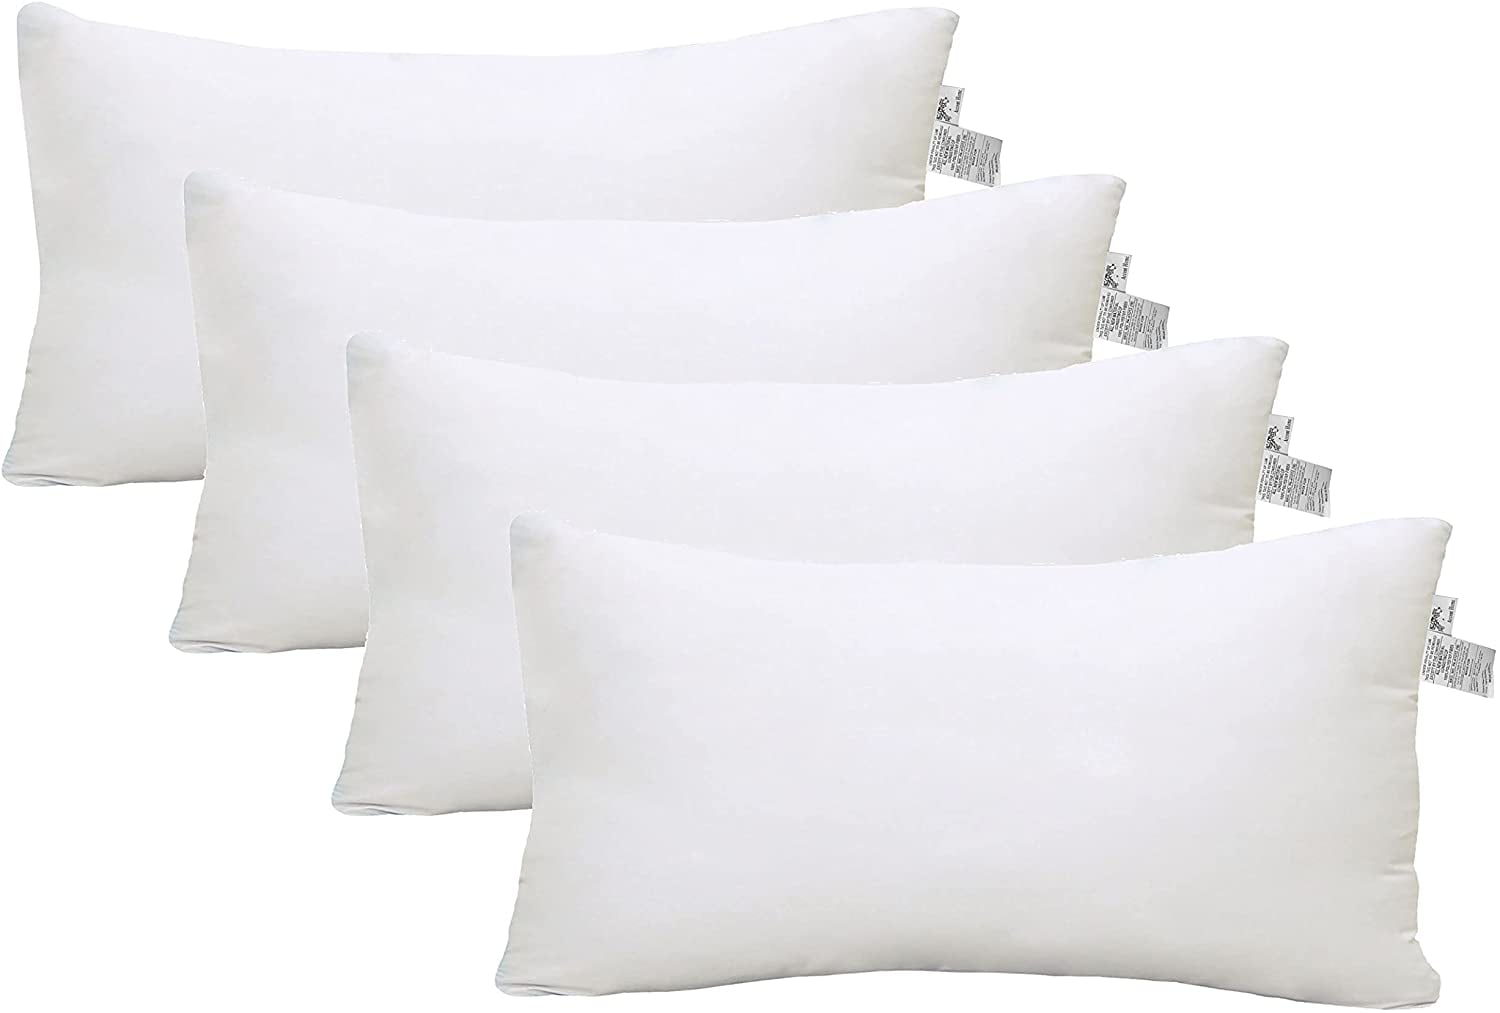 Keeble Outlets Throw Pillow Inserts - White, 18 x 18 Inches, Set of 2 Indoor Decorative Pillow - Square Pillow Inserts for Couch, Sofa, Bed and Chair